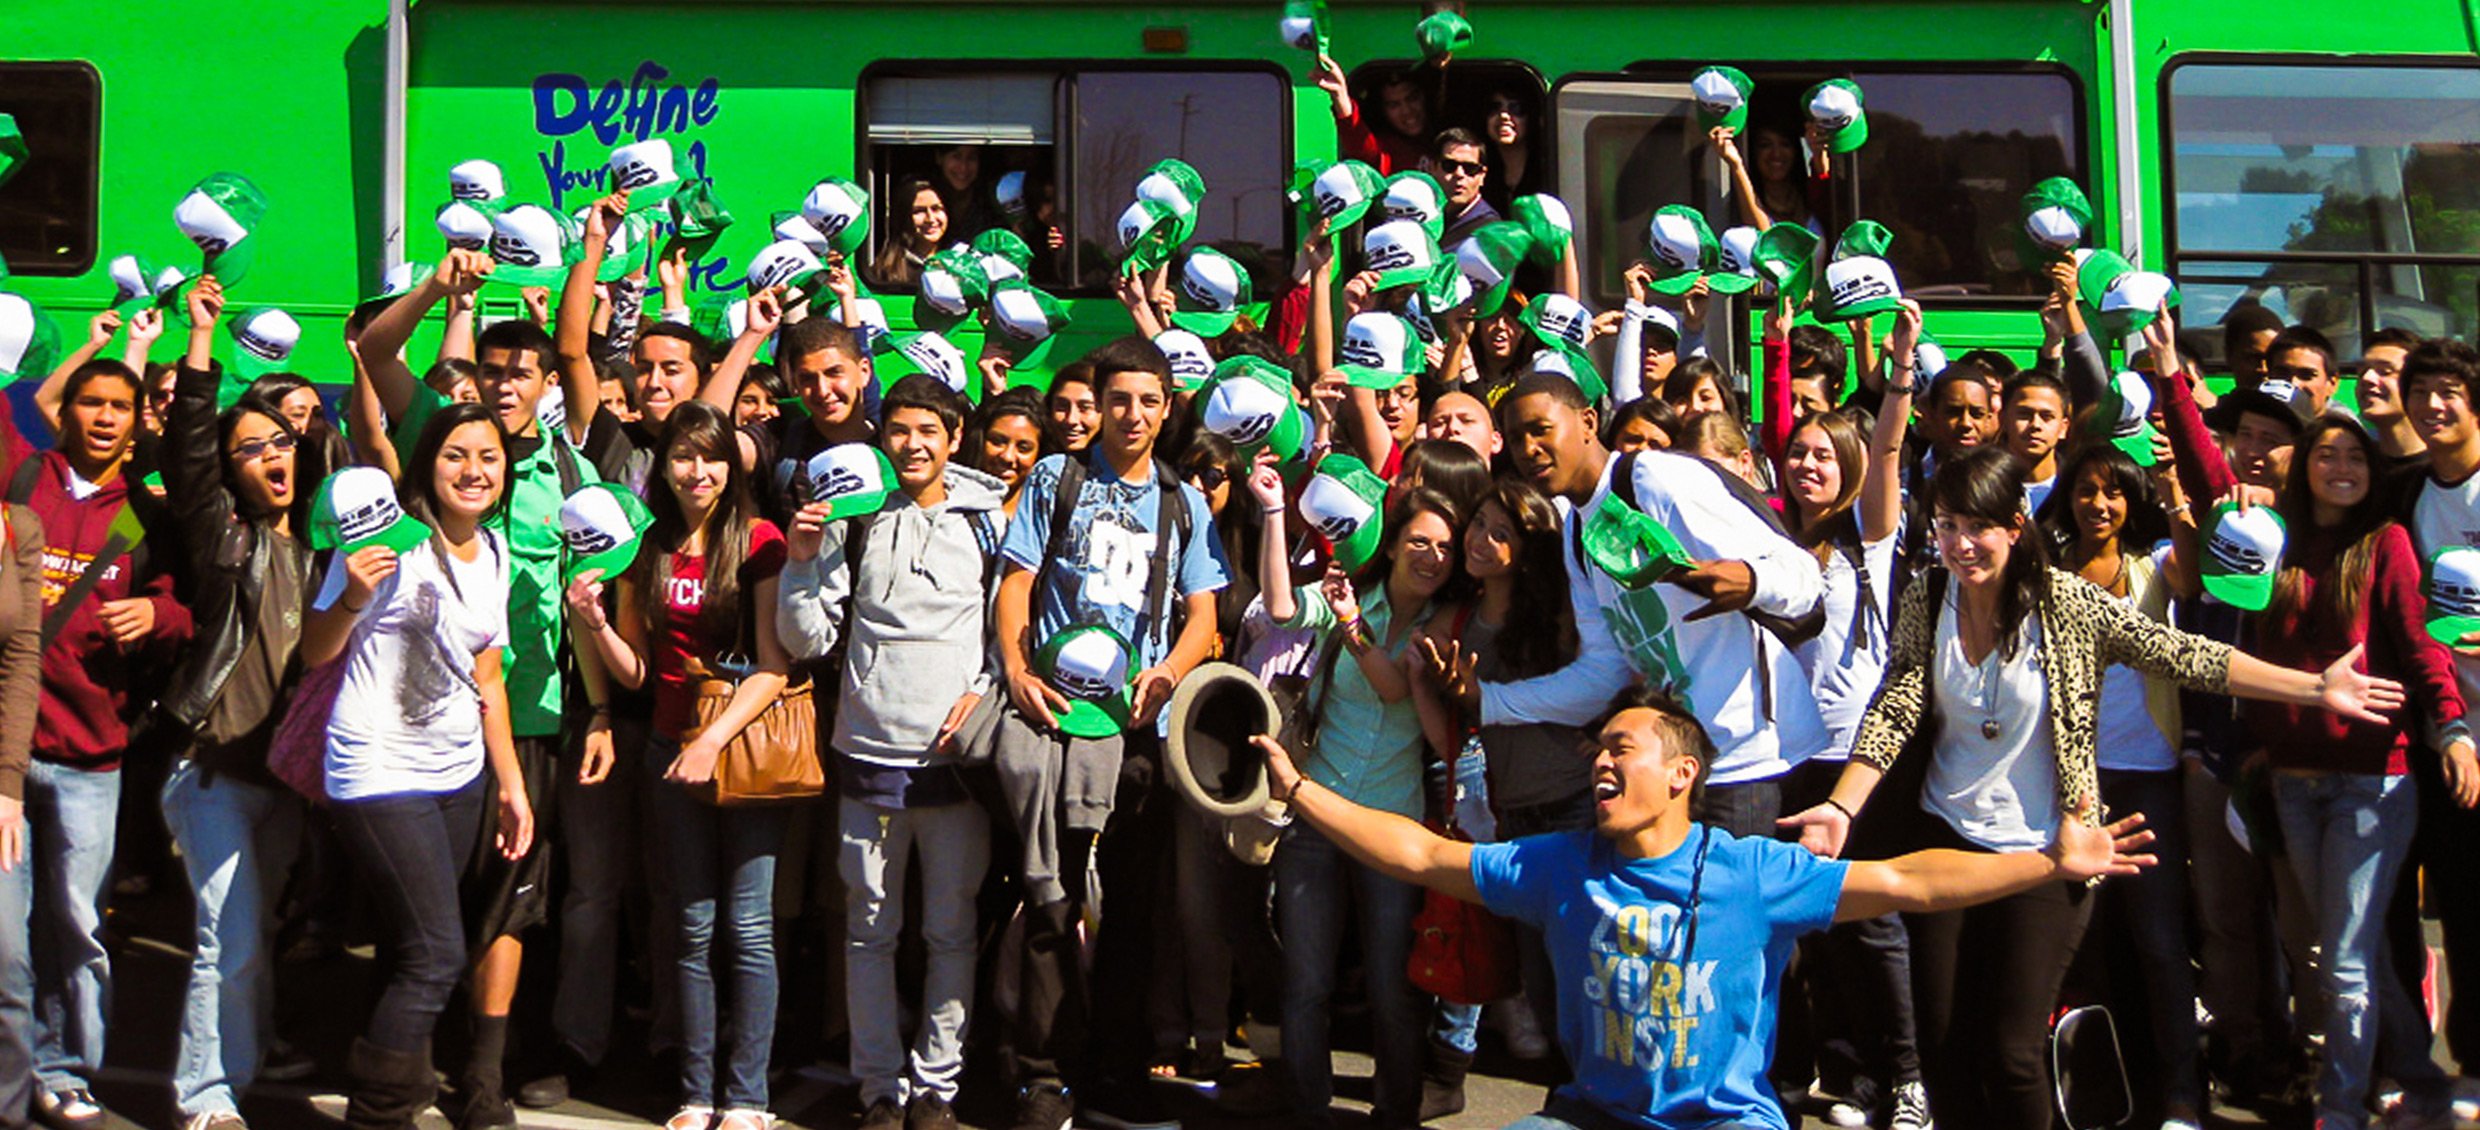 A group of students show off their Roadtrip Nation swag in front of the green RV